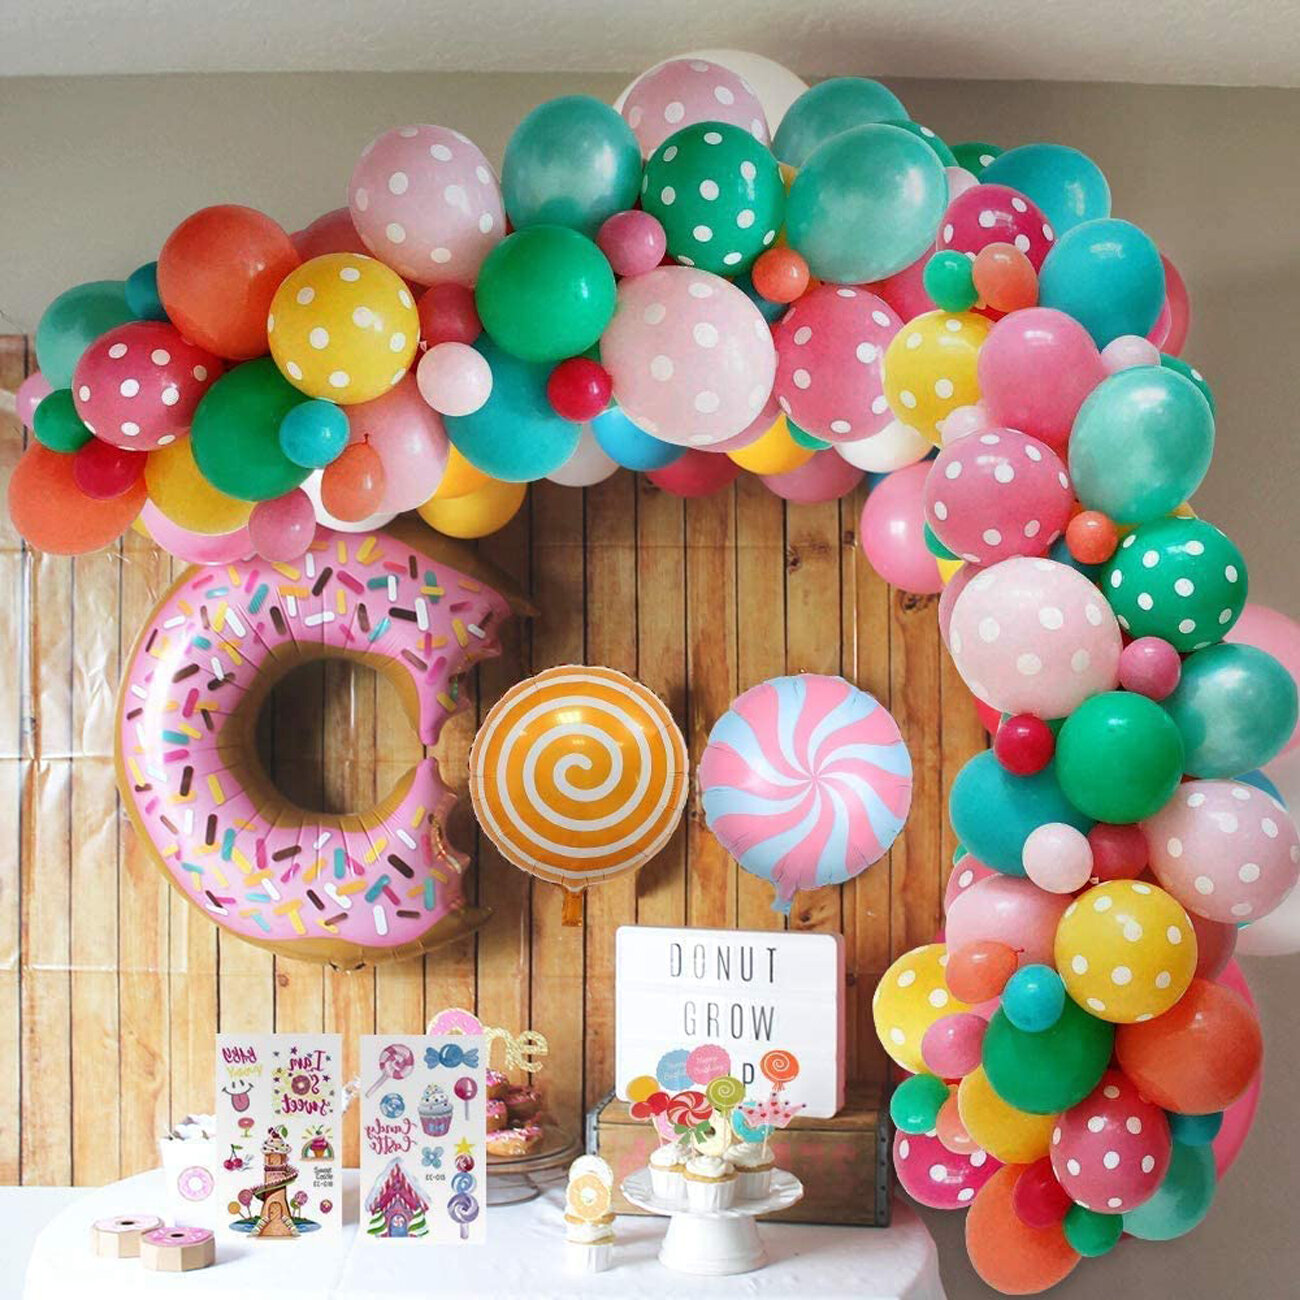 Candy Balloon Garland and Arch Kit Candyland Party Decorations with Pastel Macaron Lollipop Balloons for Christmas Holiday Candy Theme Baby Shower Birthday Party Supplies 